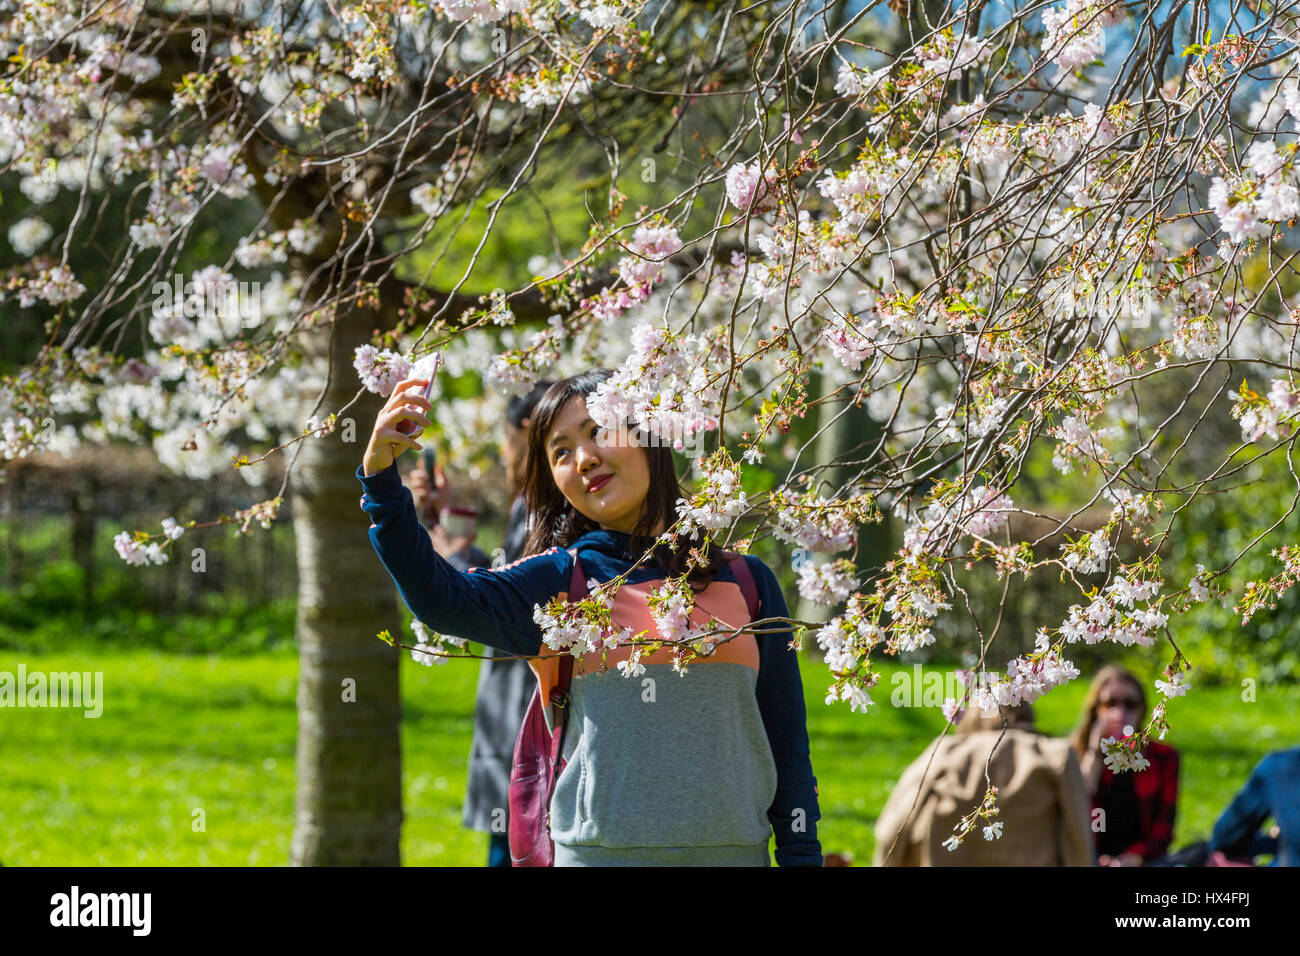 The Regents Park, London, was bathed in warm spring sunshine over the last weekend, bringing out Londoners and tourists taking selfies amongst the cherry blossom trees with their smartphones, England, UK Stock Photo